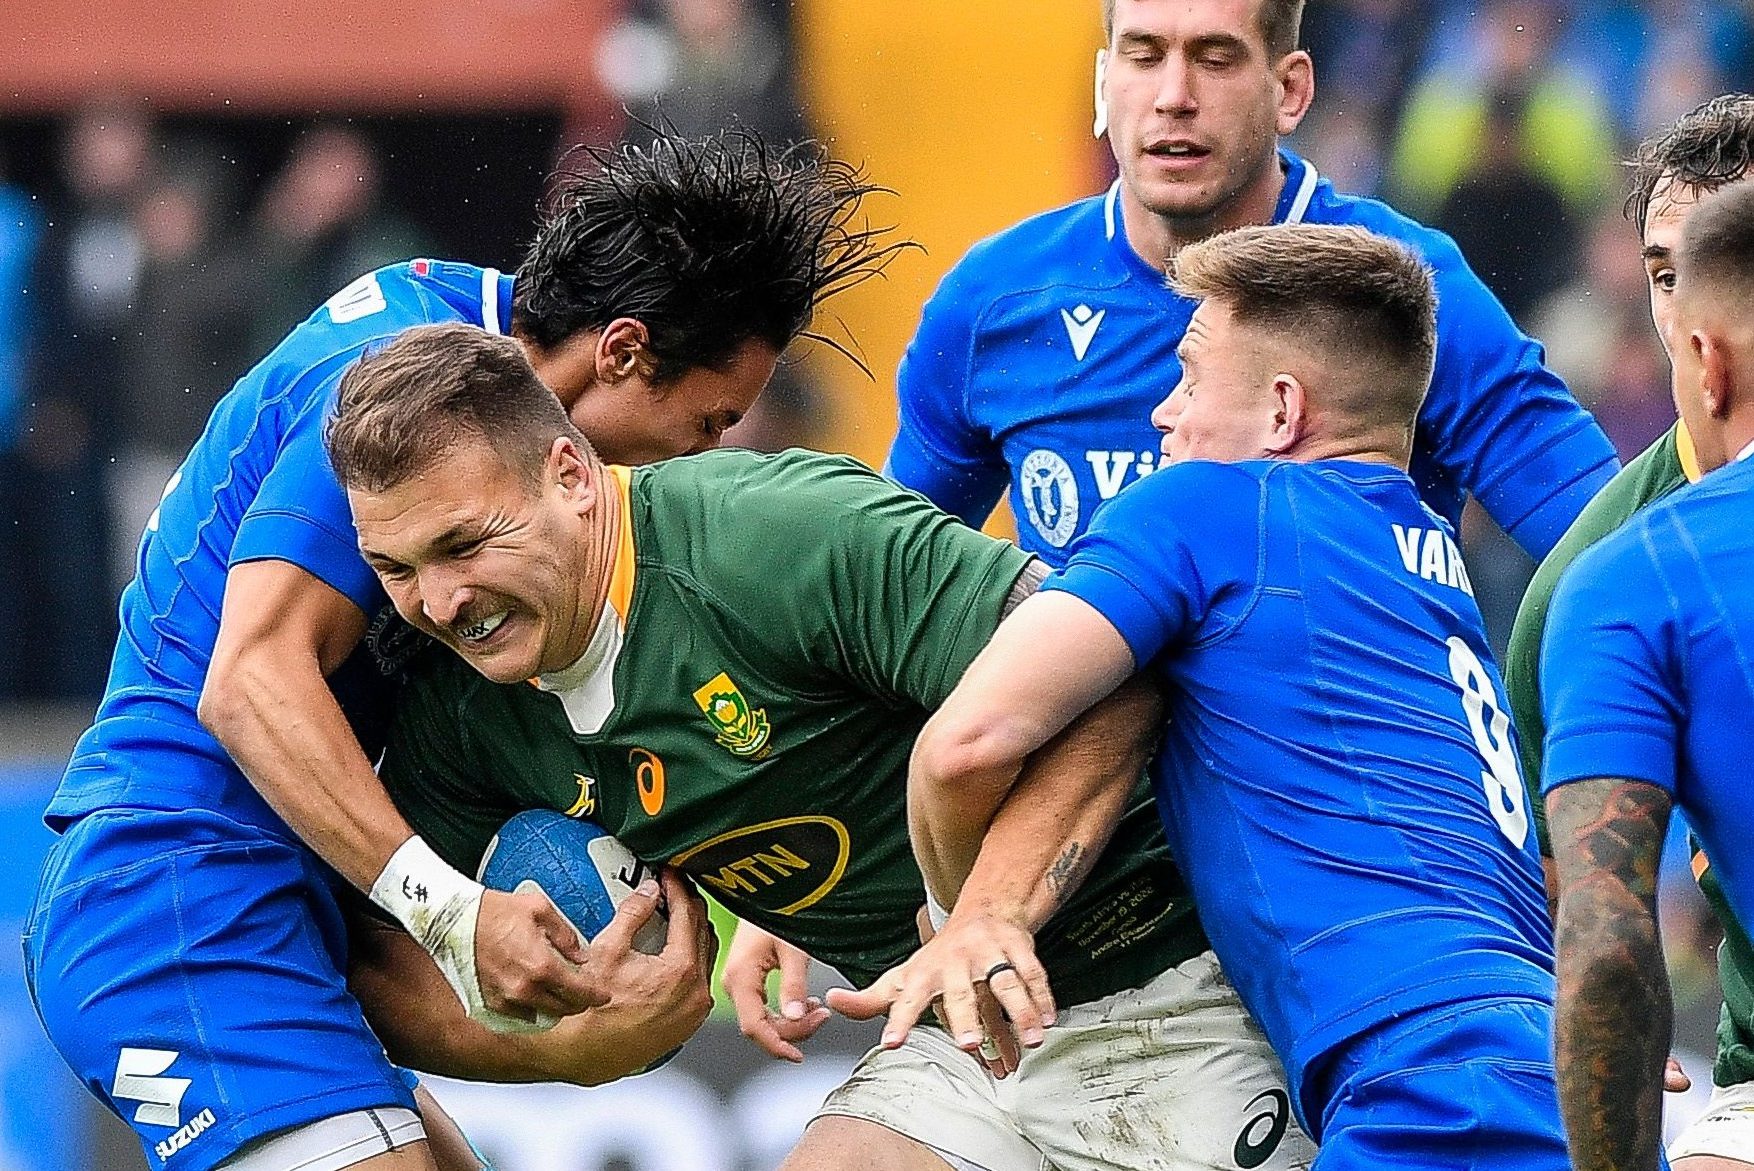 Mandatory Credit: Photo by Luca Sighinolfi/INPHO/Shutterstock/BackpagePix (13630213o) Italy vs South Africa. South Africa's Andre Esterhuizen tackled by Ange Capuozzo and Stephen Varney of Italy 2022 Autumn Nations Series, Stadio Luigi Ferraris, Genoa - 19 Nov 2022